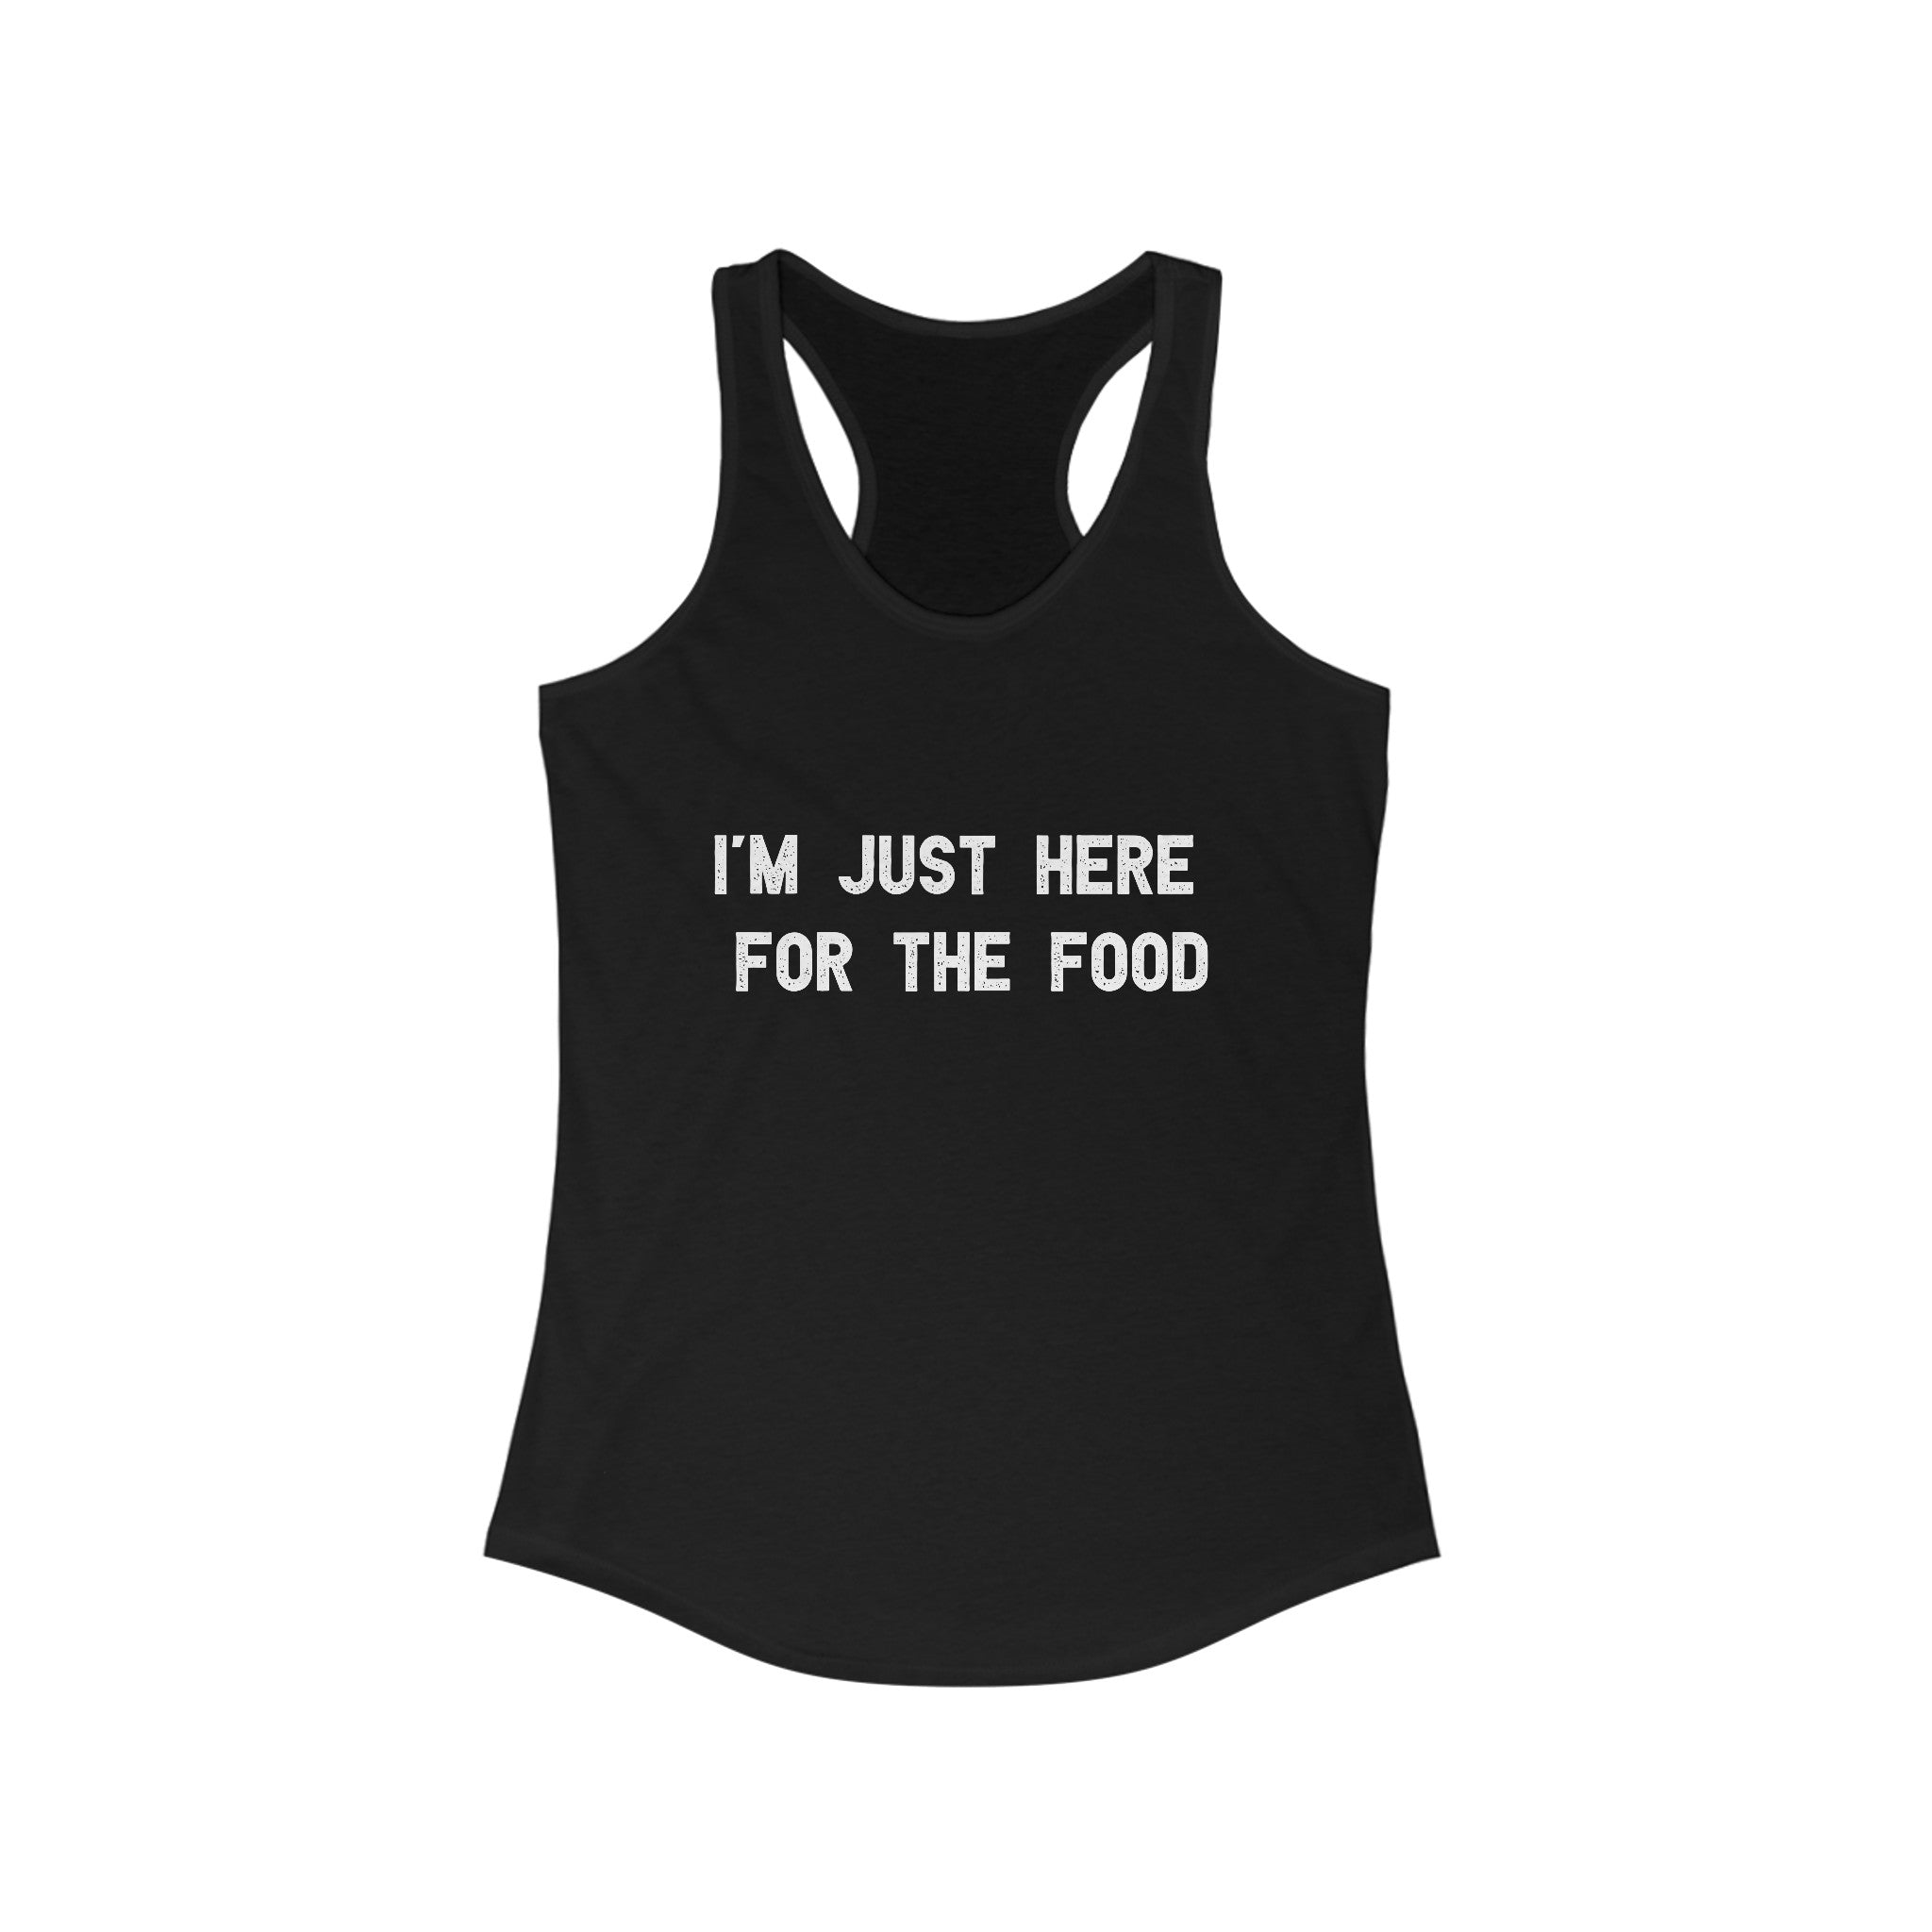 I'm Just Here For The Food - Women's Racerback Tank